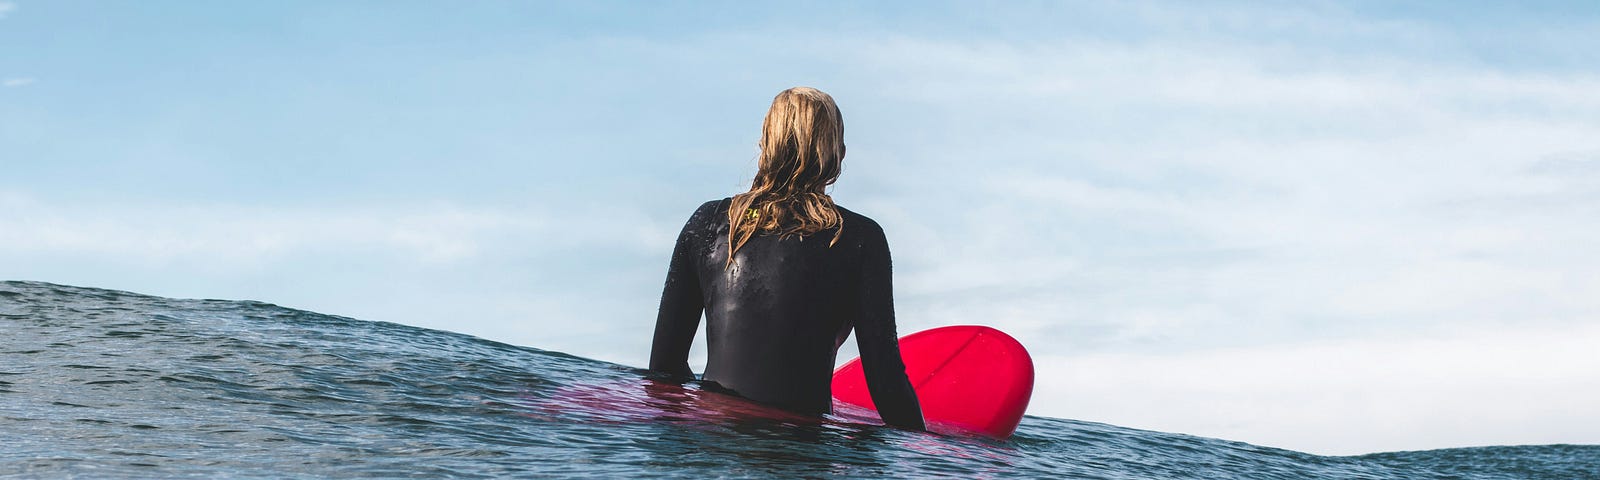 A female surfer clad in a wetsuit, sitting in the ocean on her red surfboard, waiting for waves